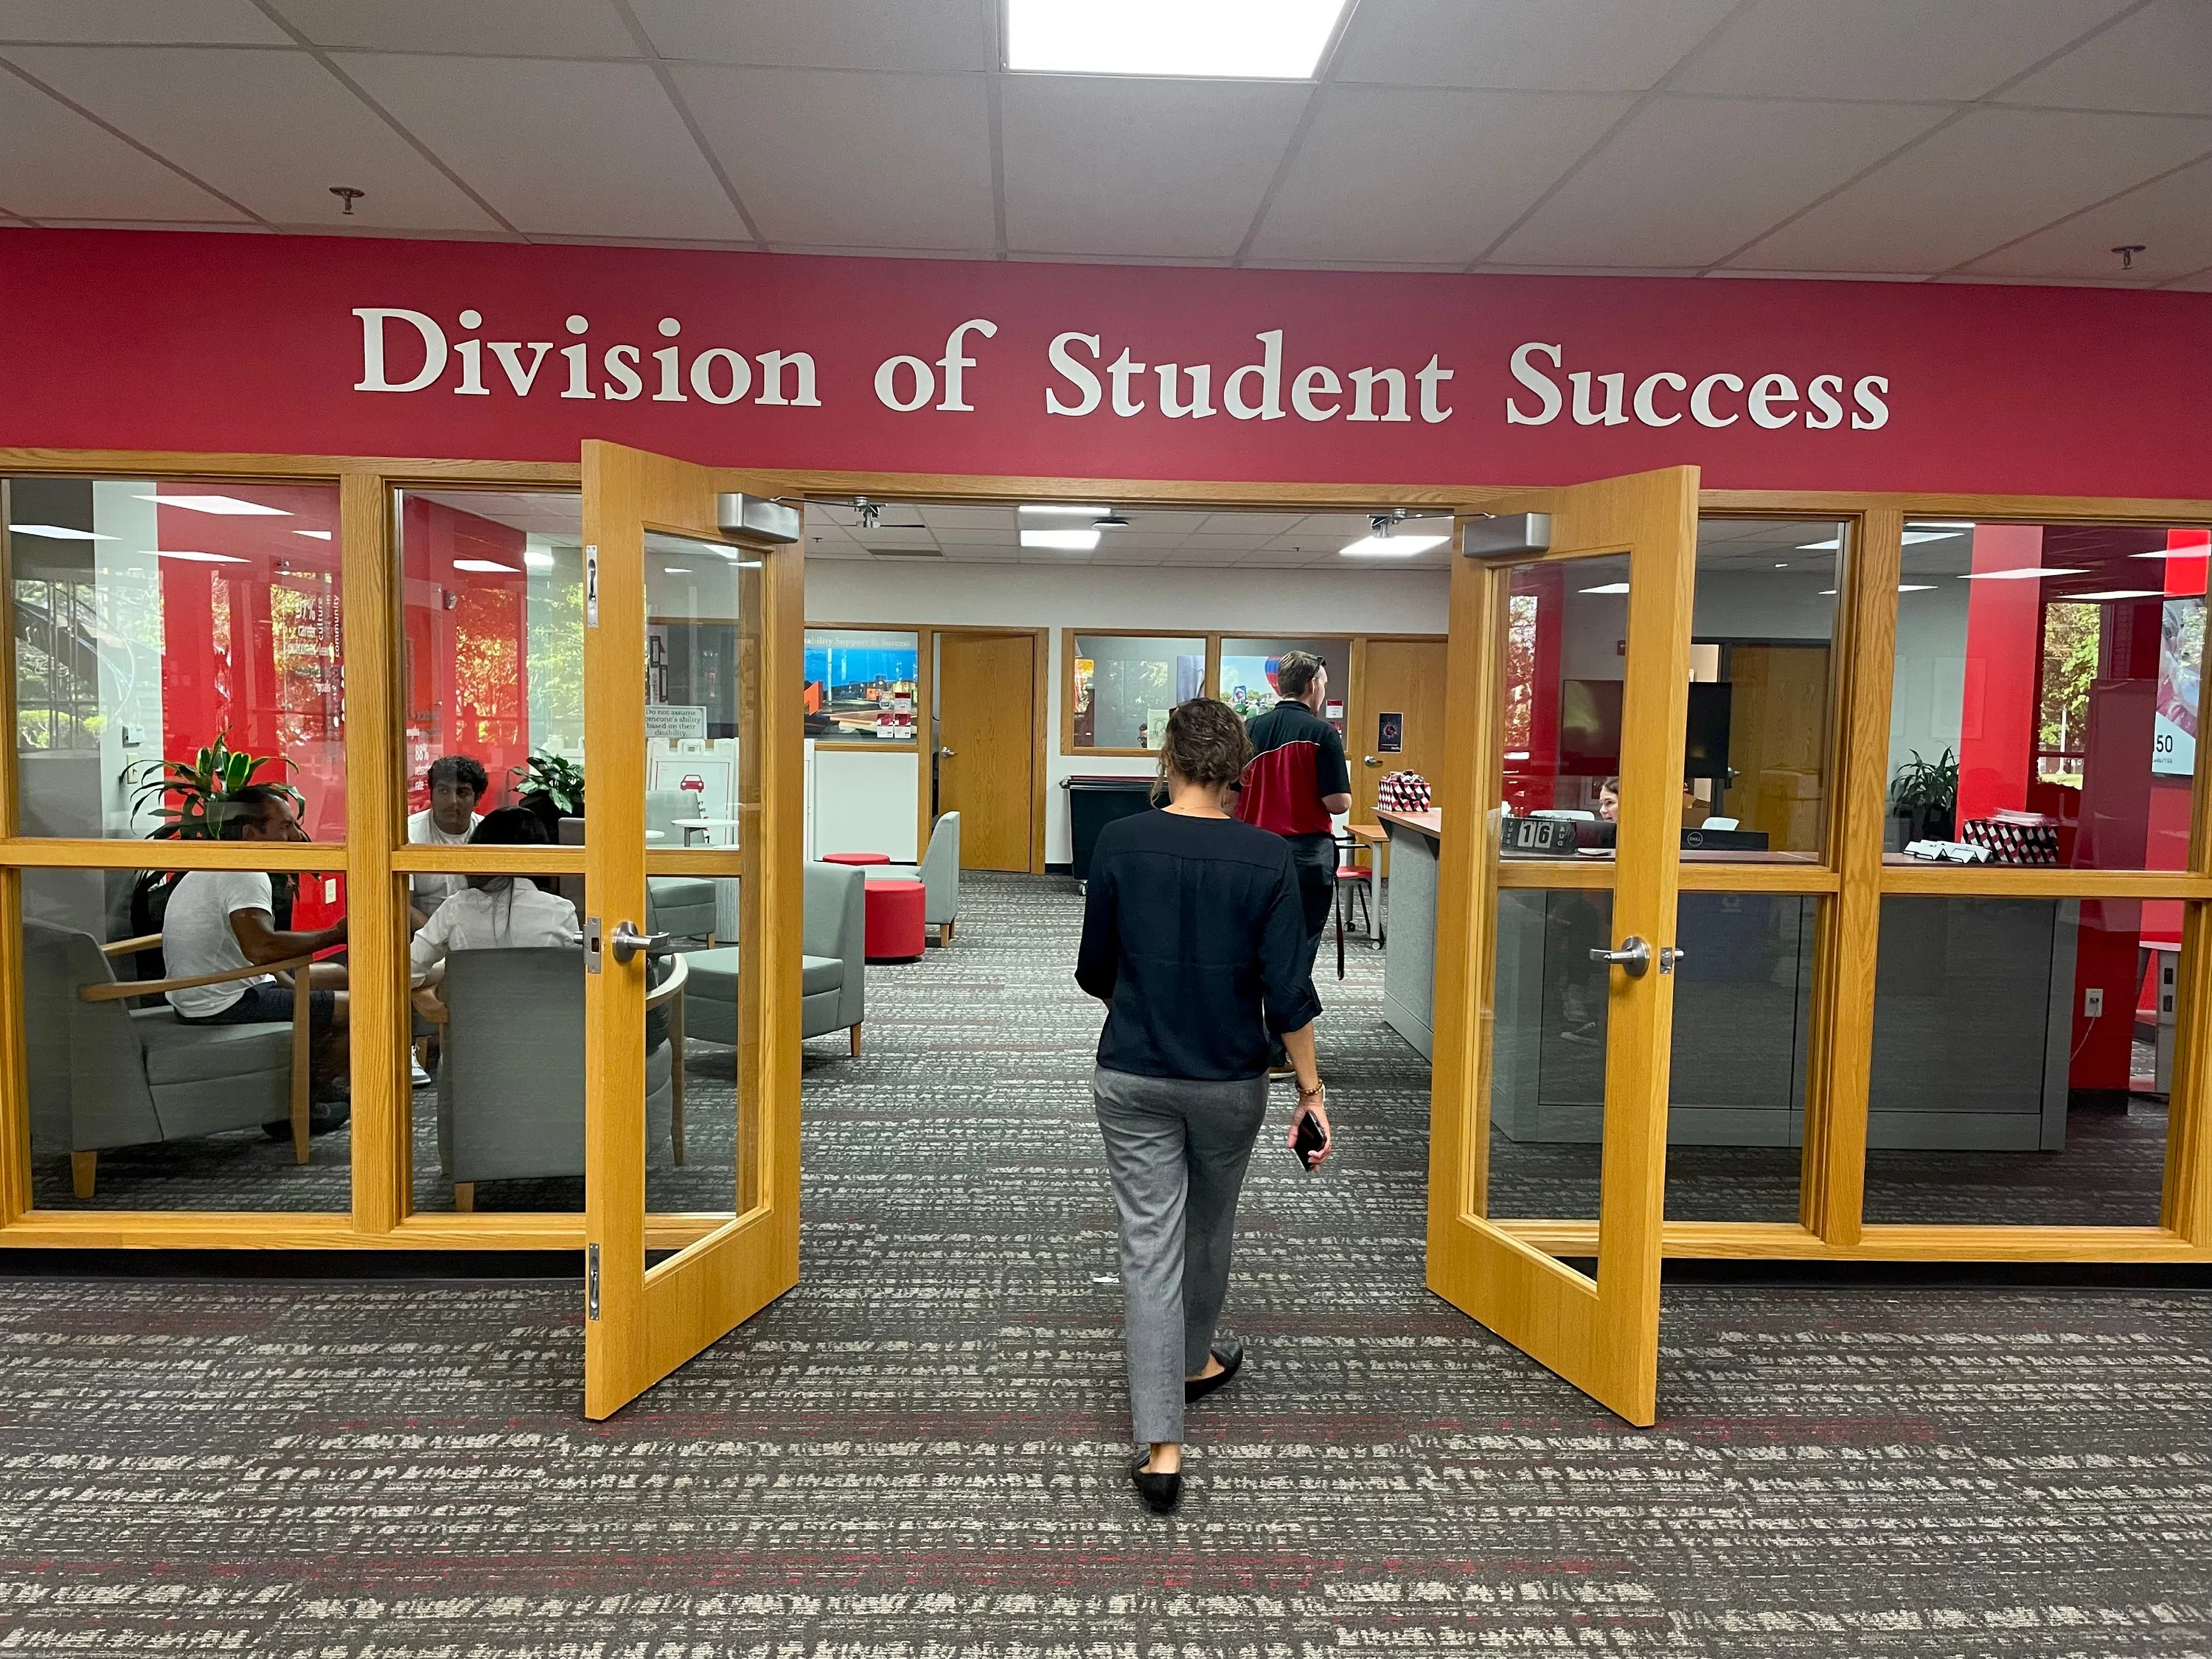 People walk into the Division of Student Success.